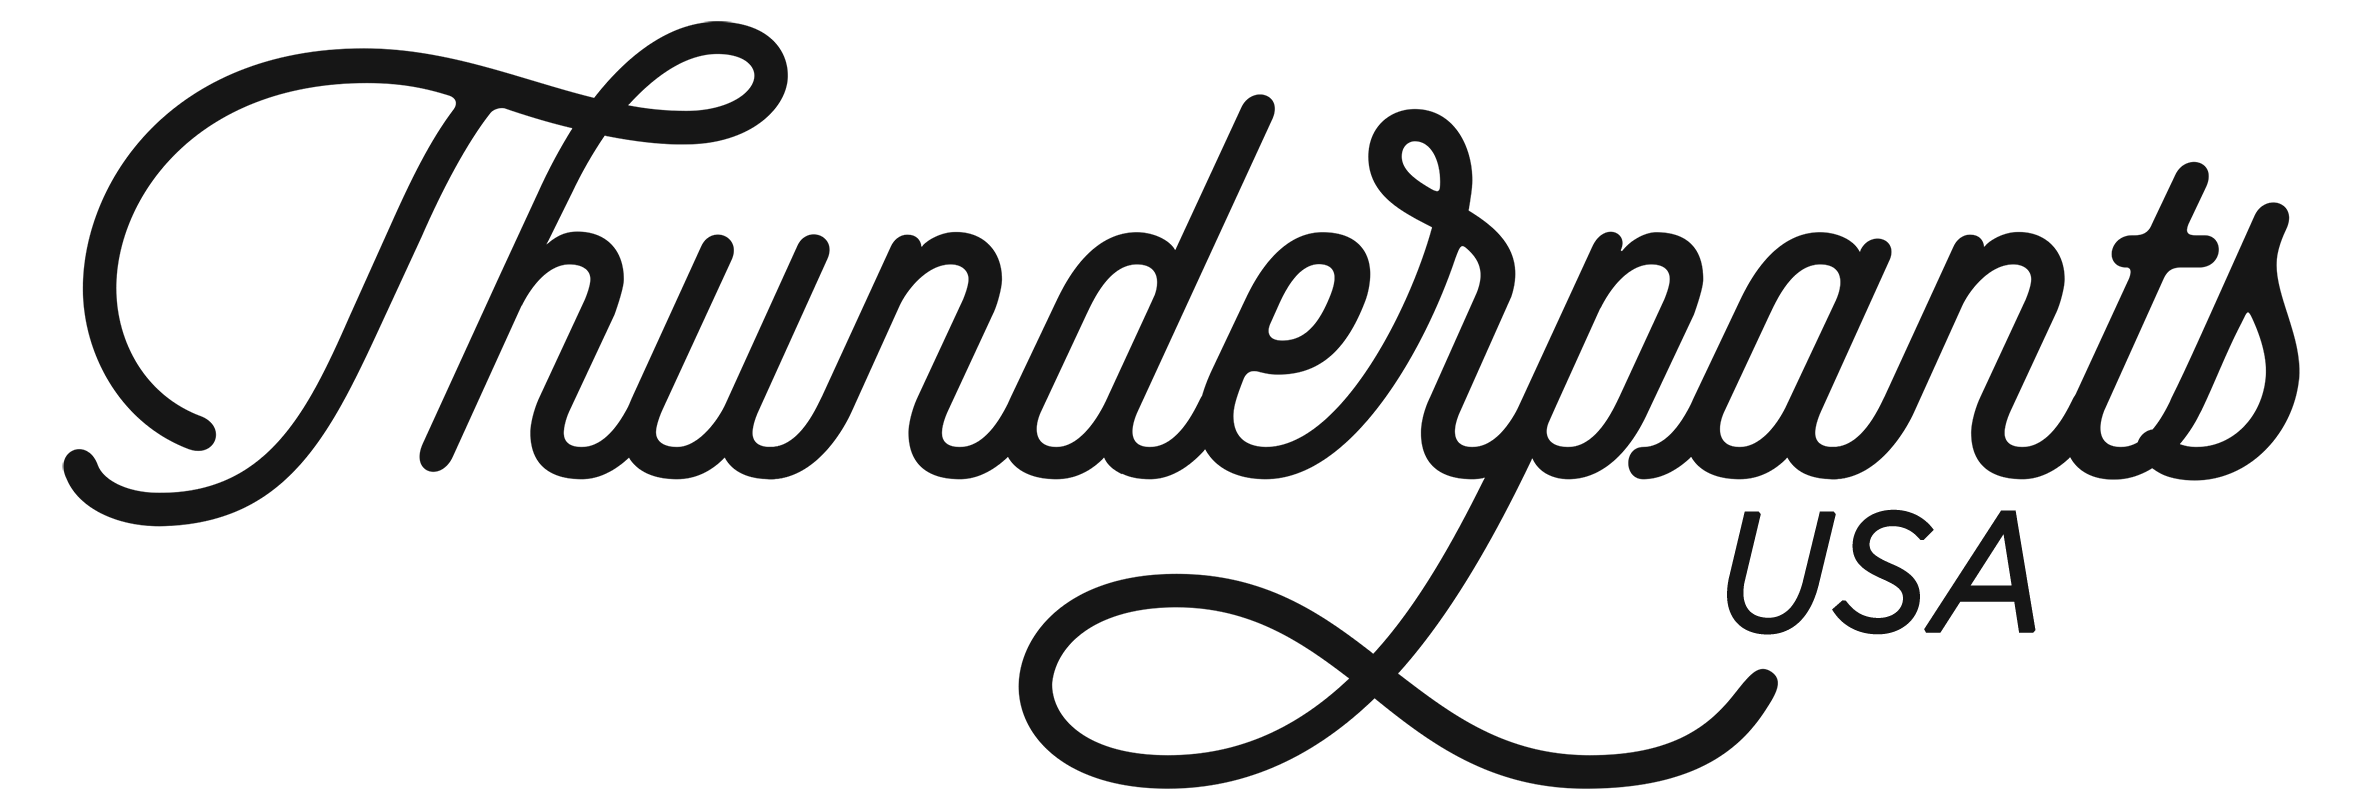 Thunderpants - Organic Cotton Underwear Made in the USA. Wedgie-Proof! – Thunderpants  USA